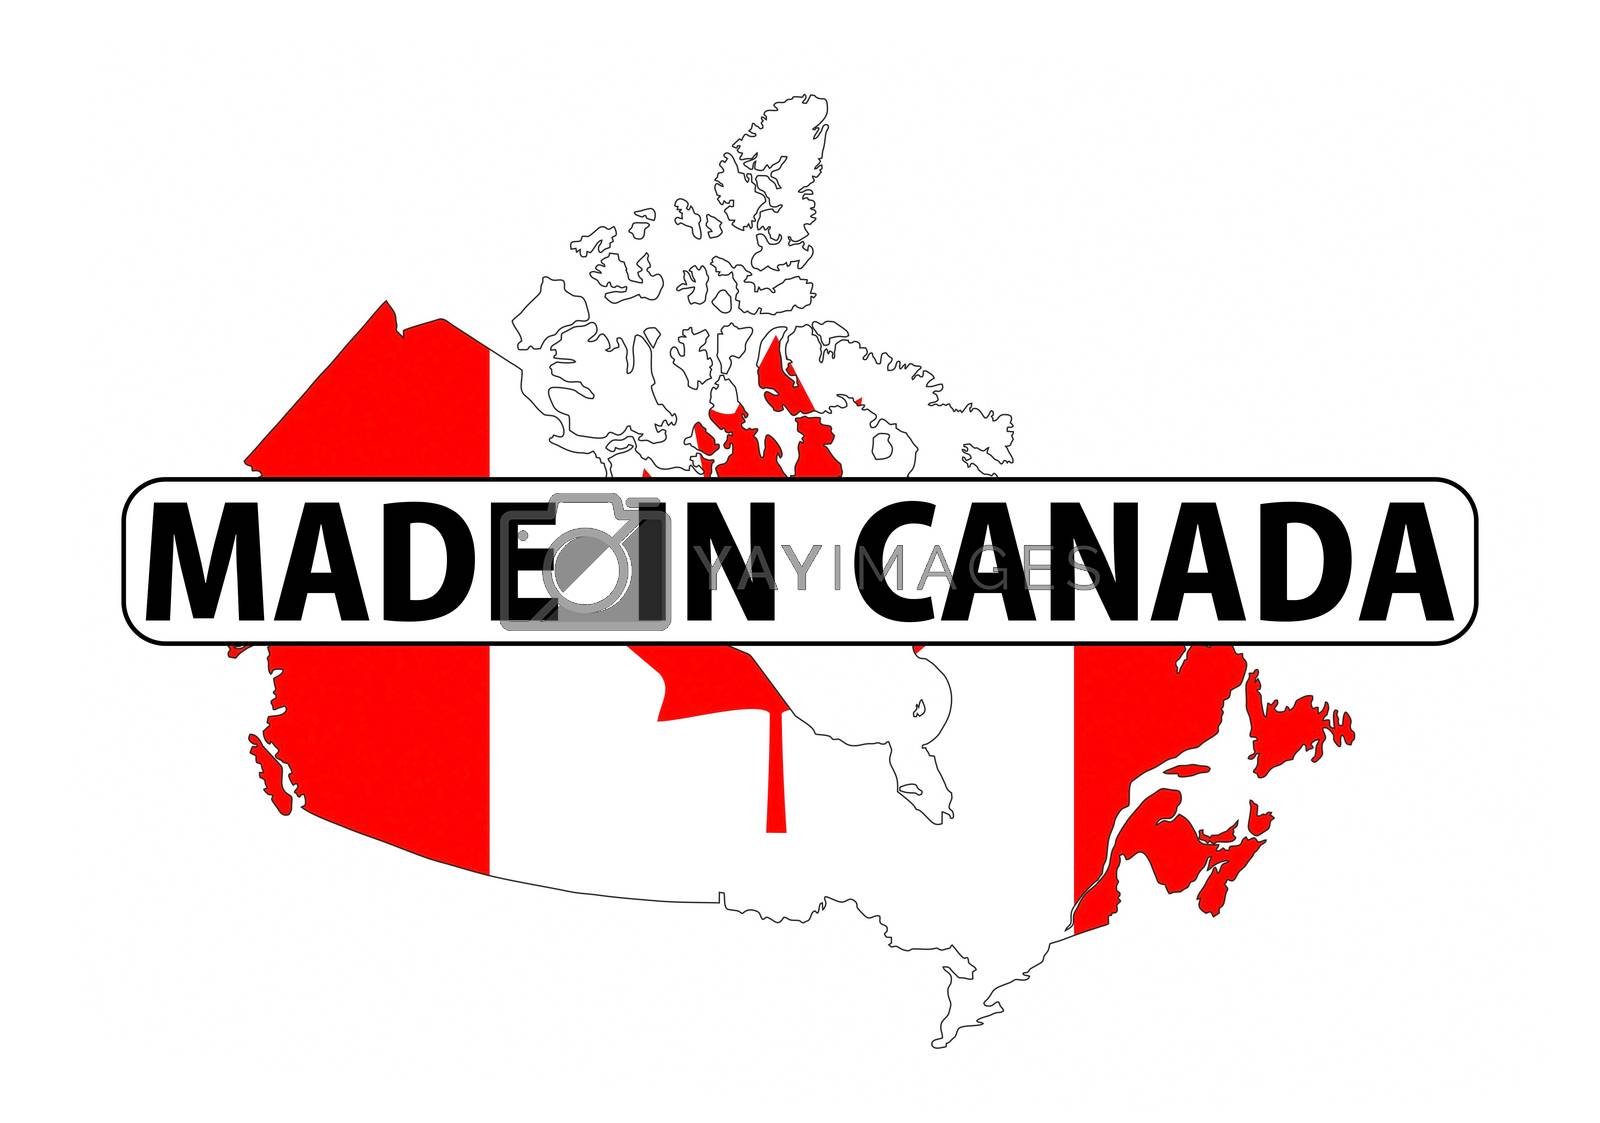 Royalty free image of made in canada by tony4urban